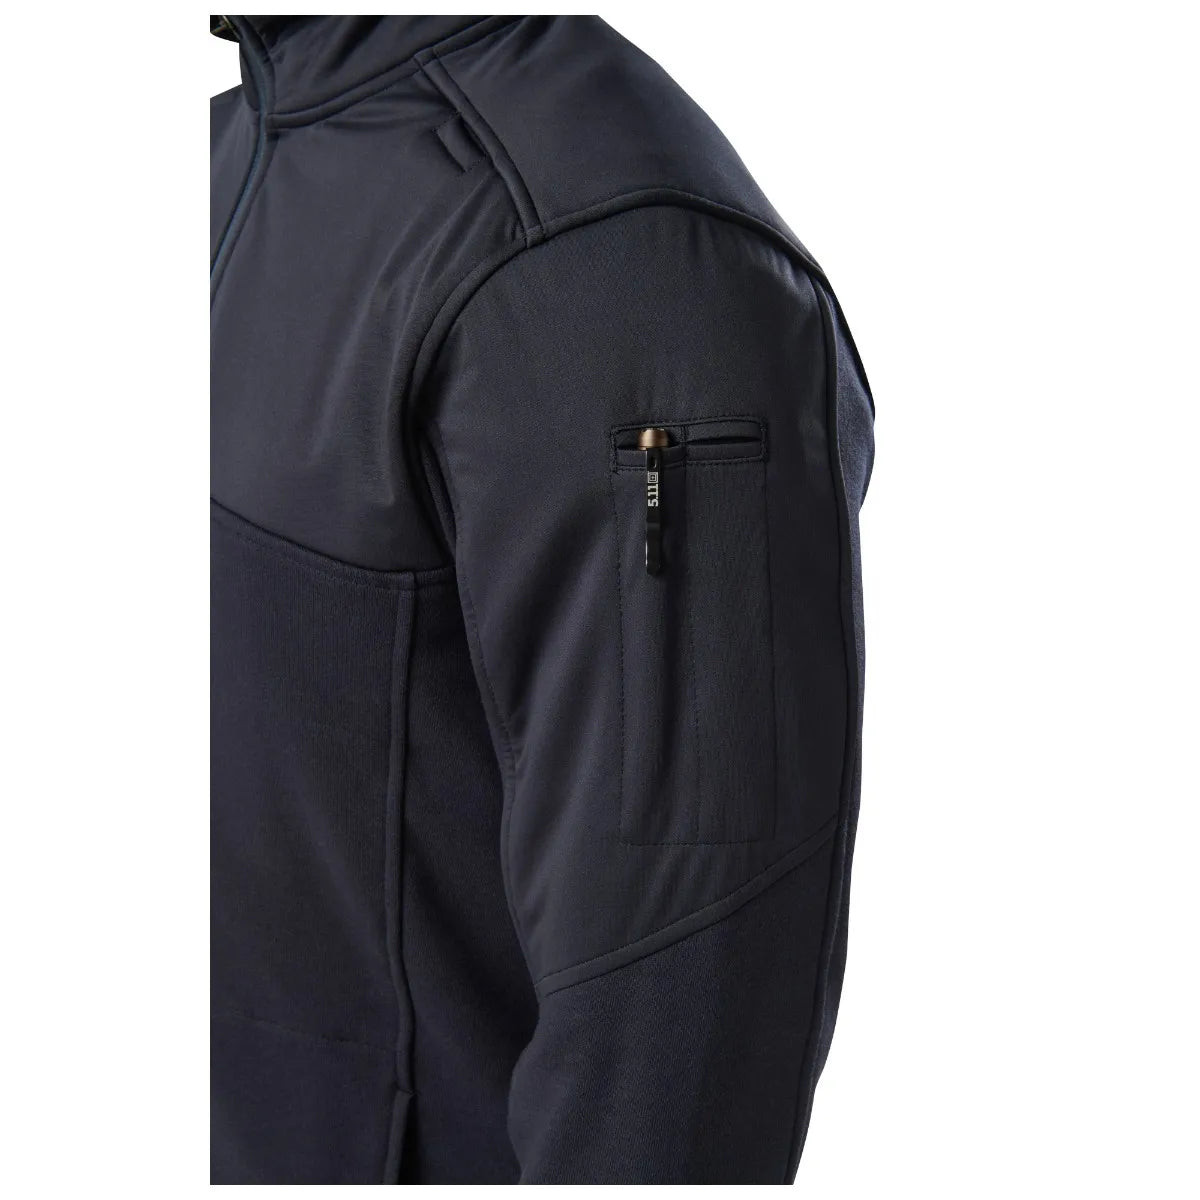 5.11 Tactical WATER-REPELLENT JOB SHIRT 2.0 72537 - Newest Products